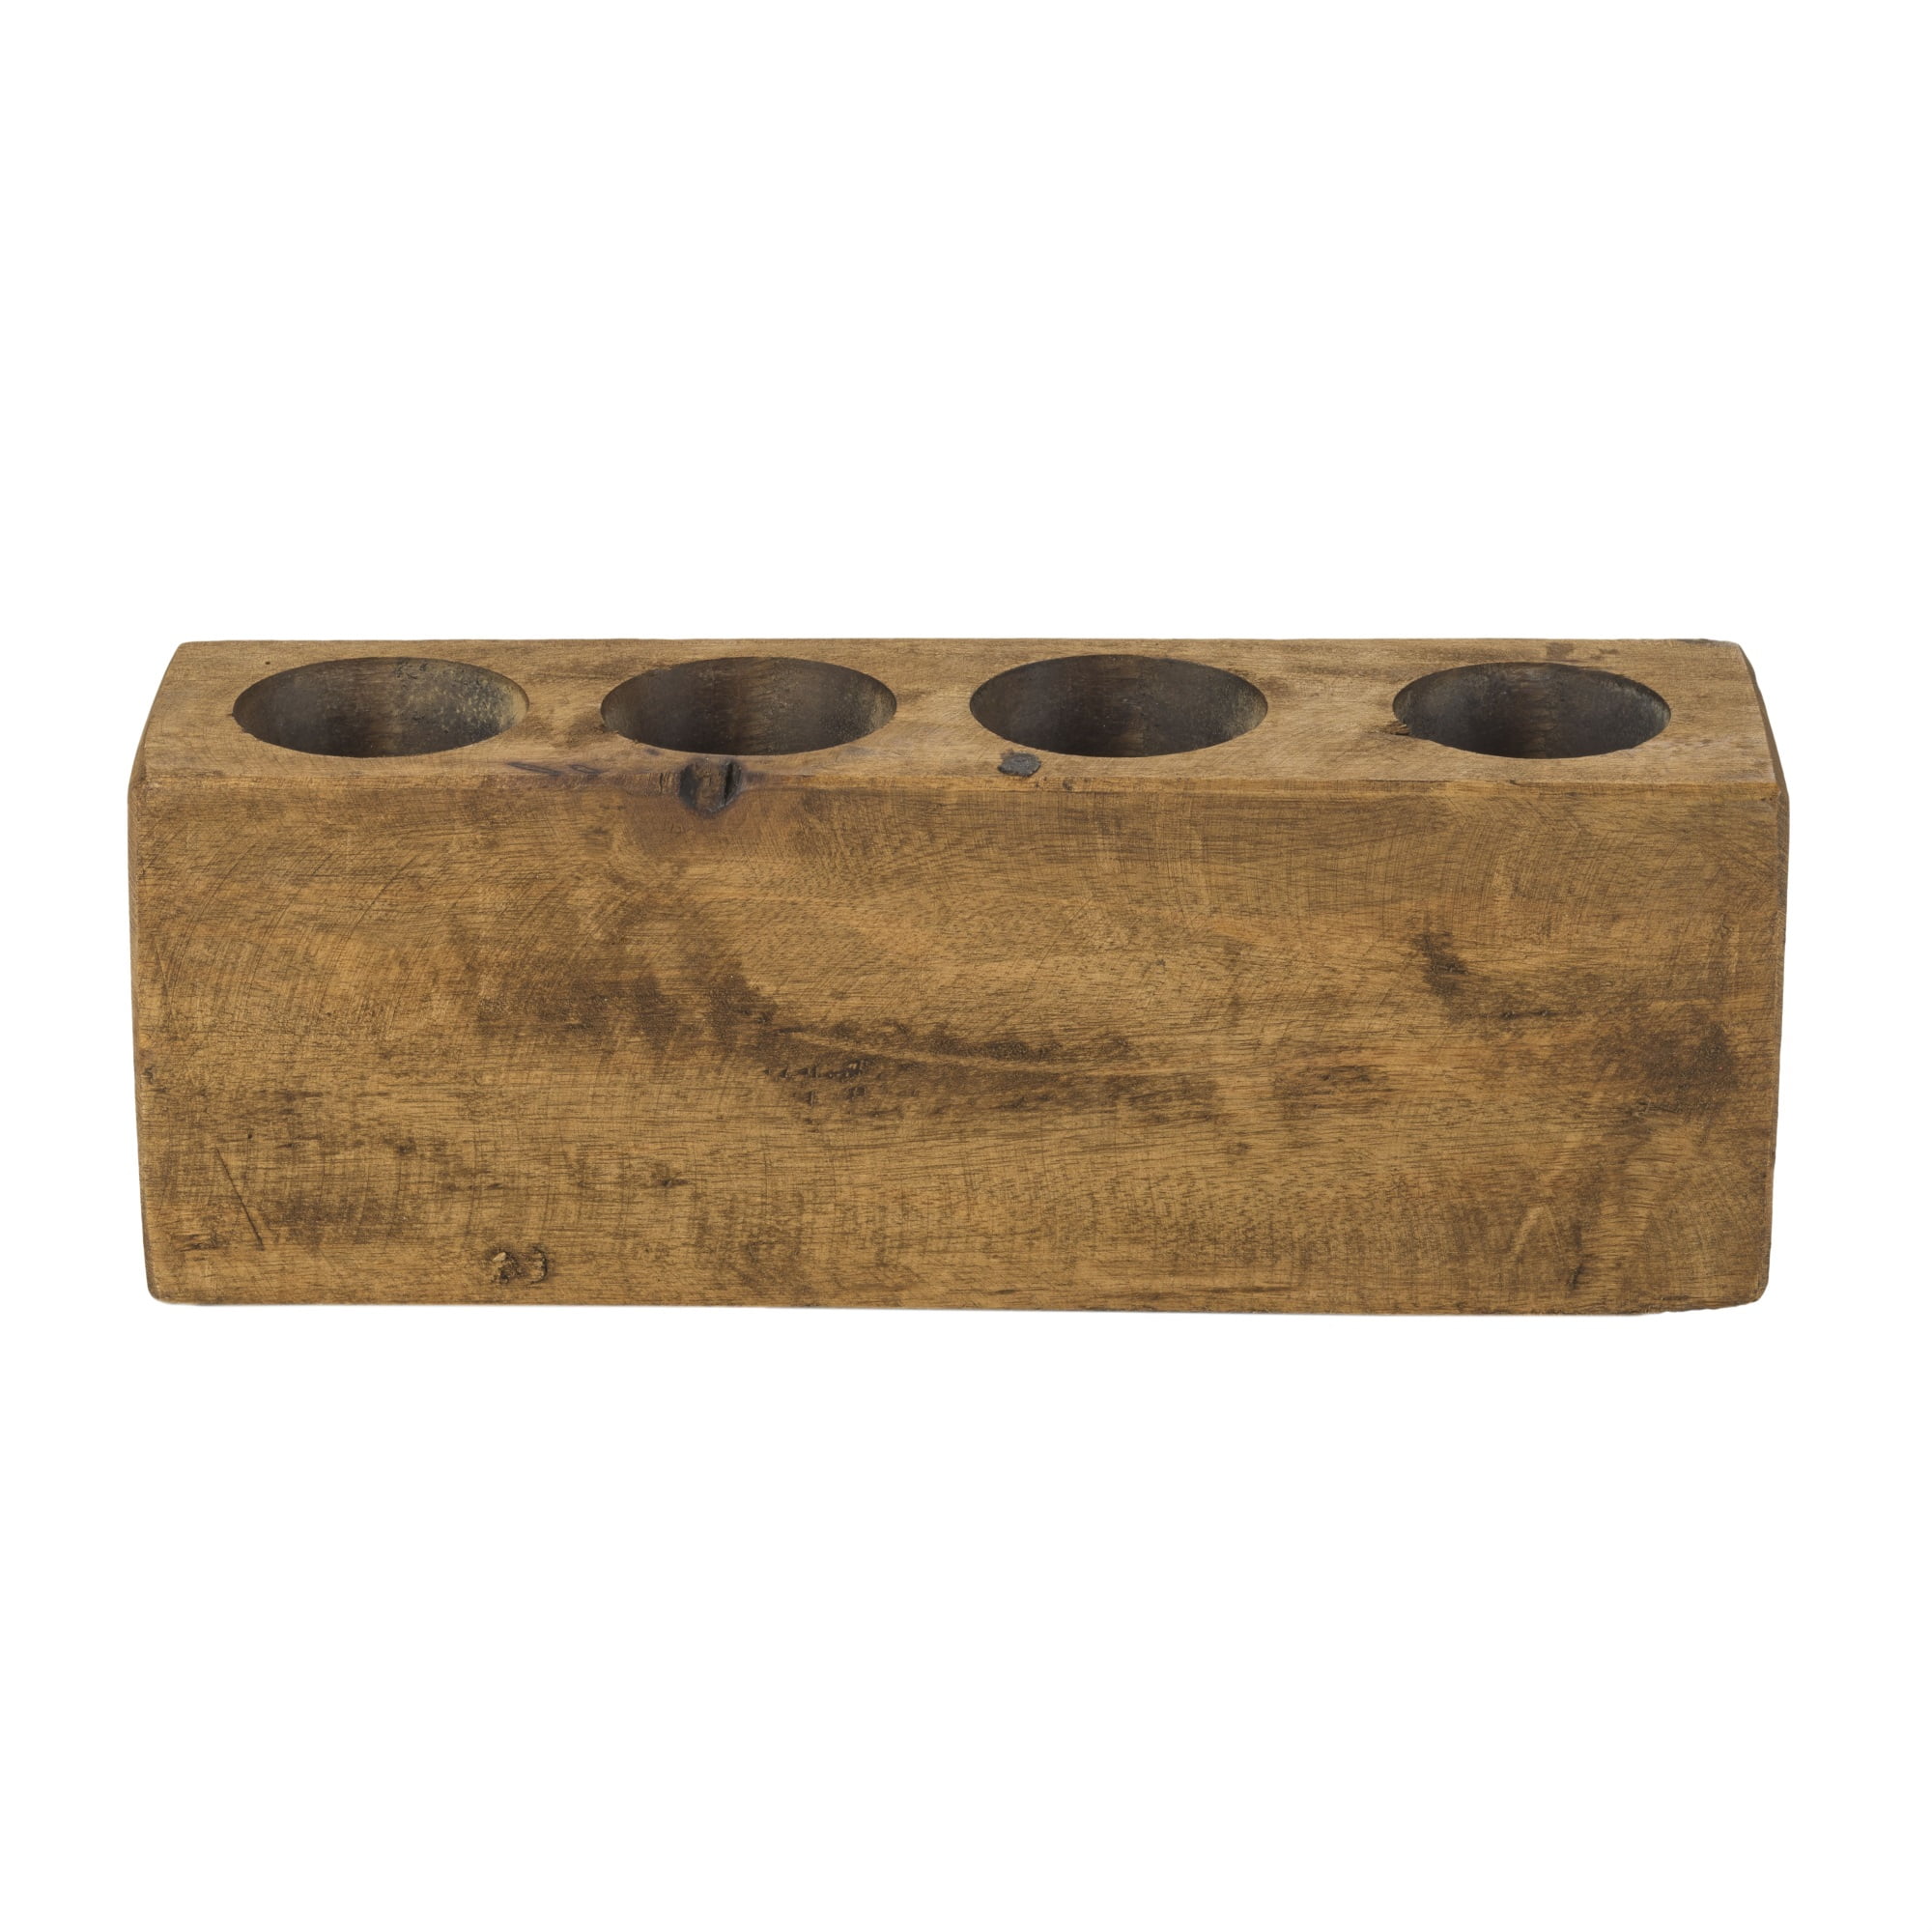 NEW THREE 3 HOLE WOODEN SUGAR MOLD CANDLE HOLDER 